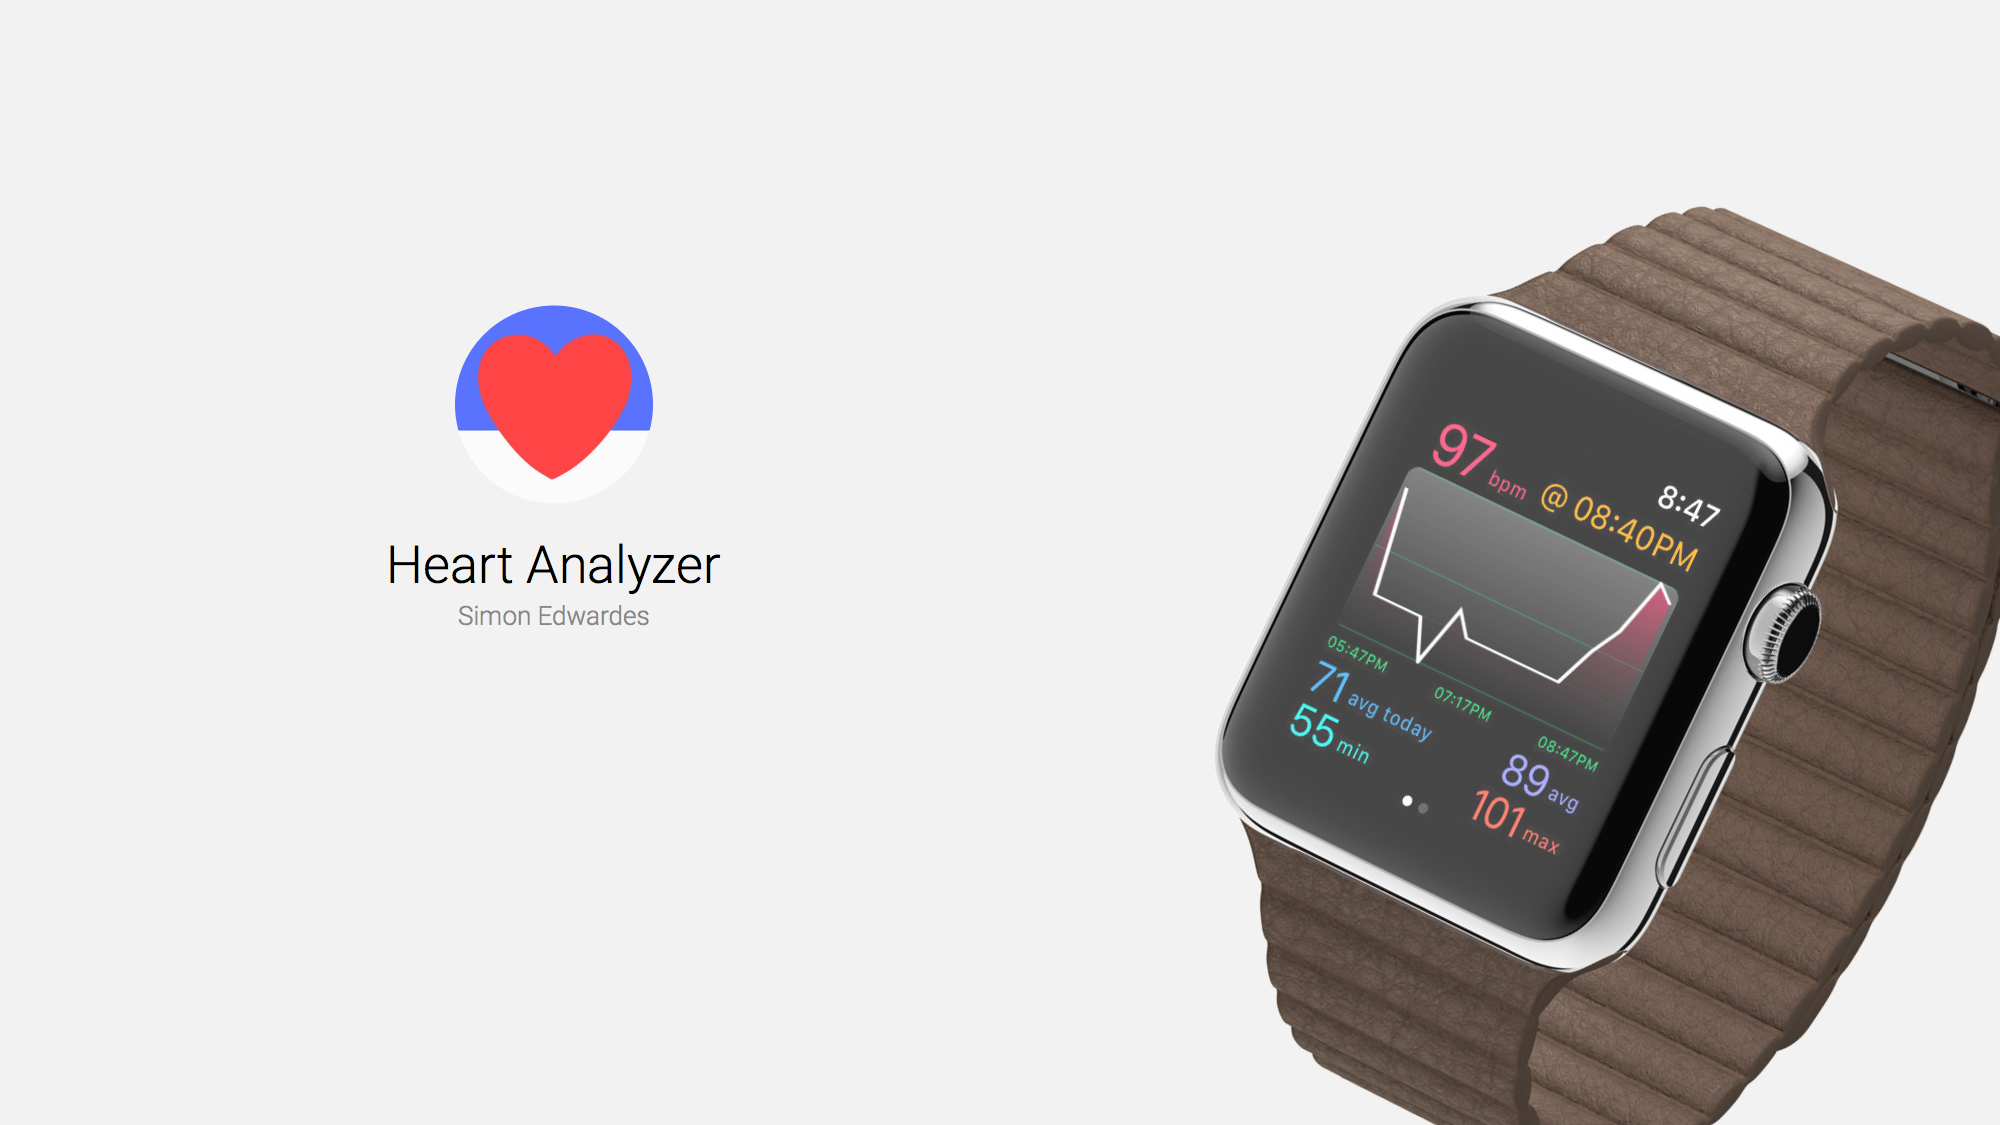 Heart Analyzer Displays Your Heart Rate Data and More